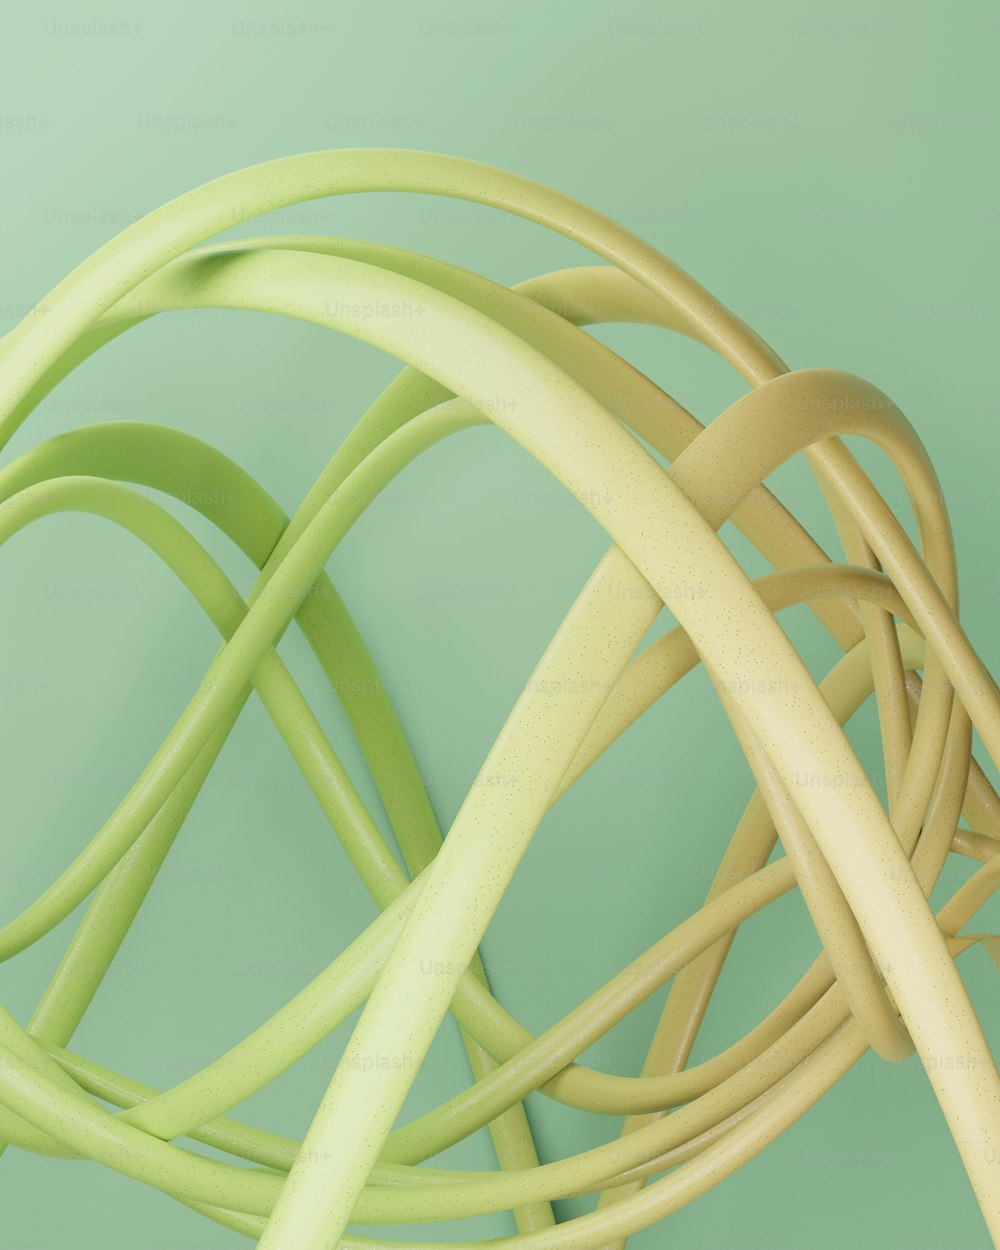 a bunch of green and yellow wires on a green background